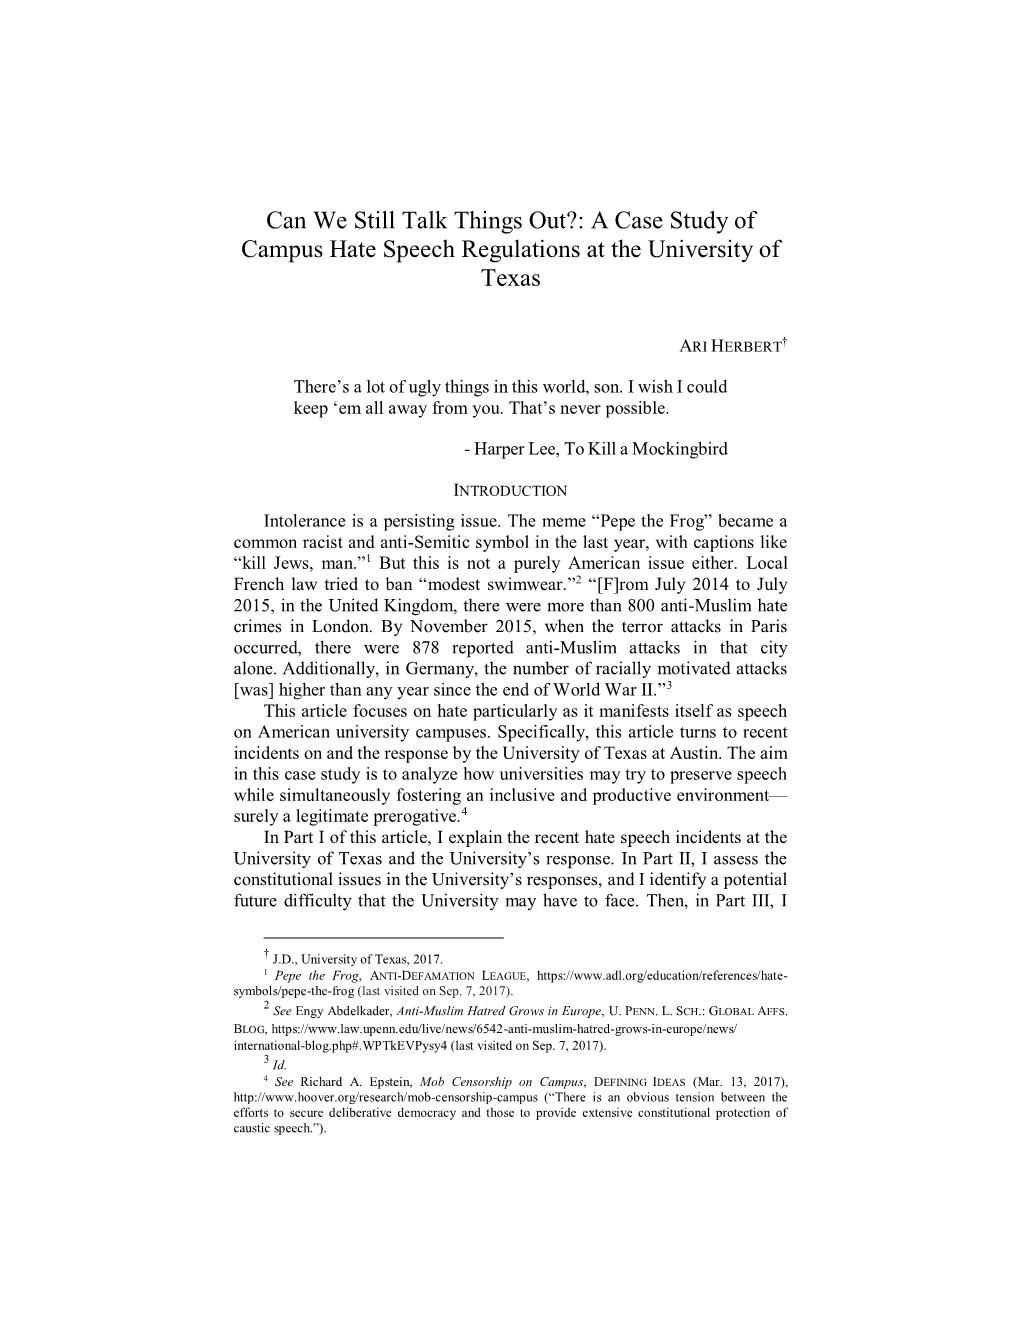 Can We Still Talk Things Out?: a Case Study of Campus Hate Speech Regulations at the University of Texas